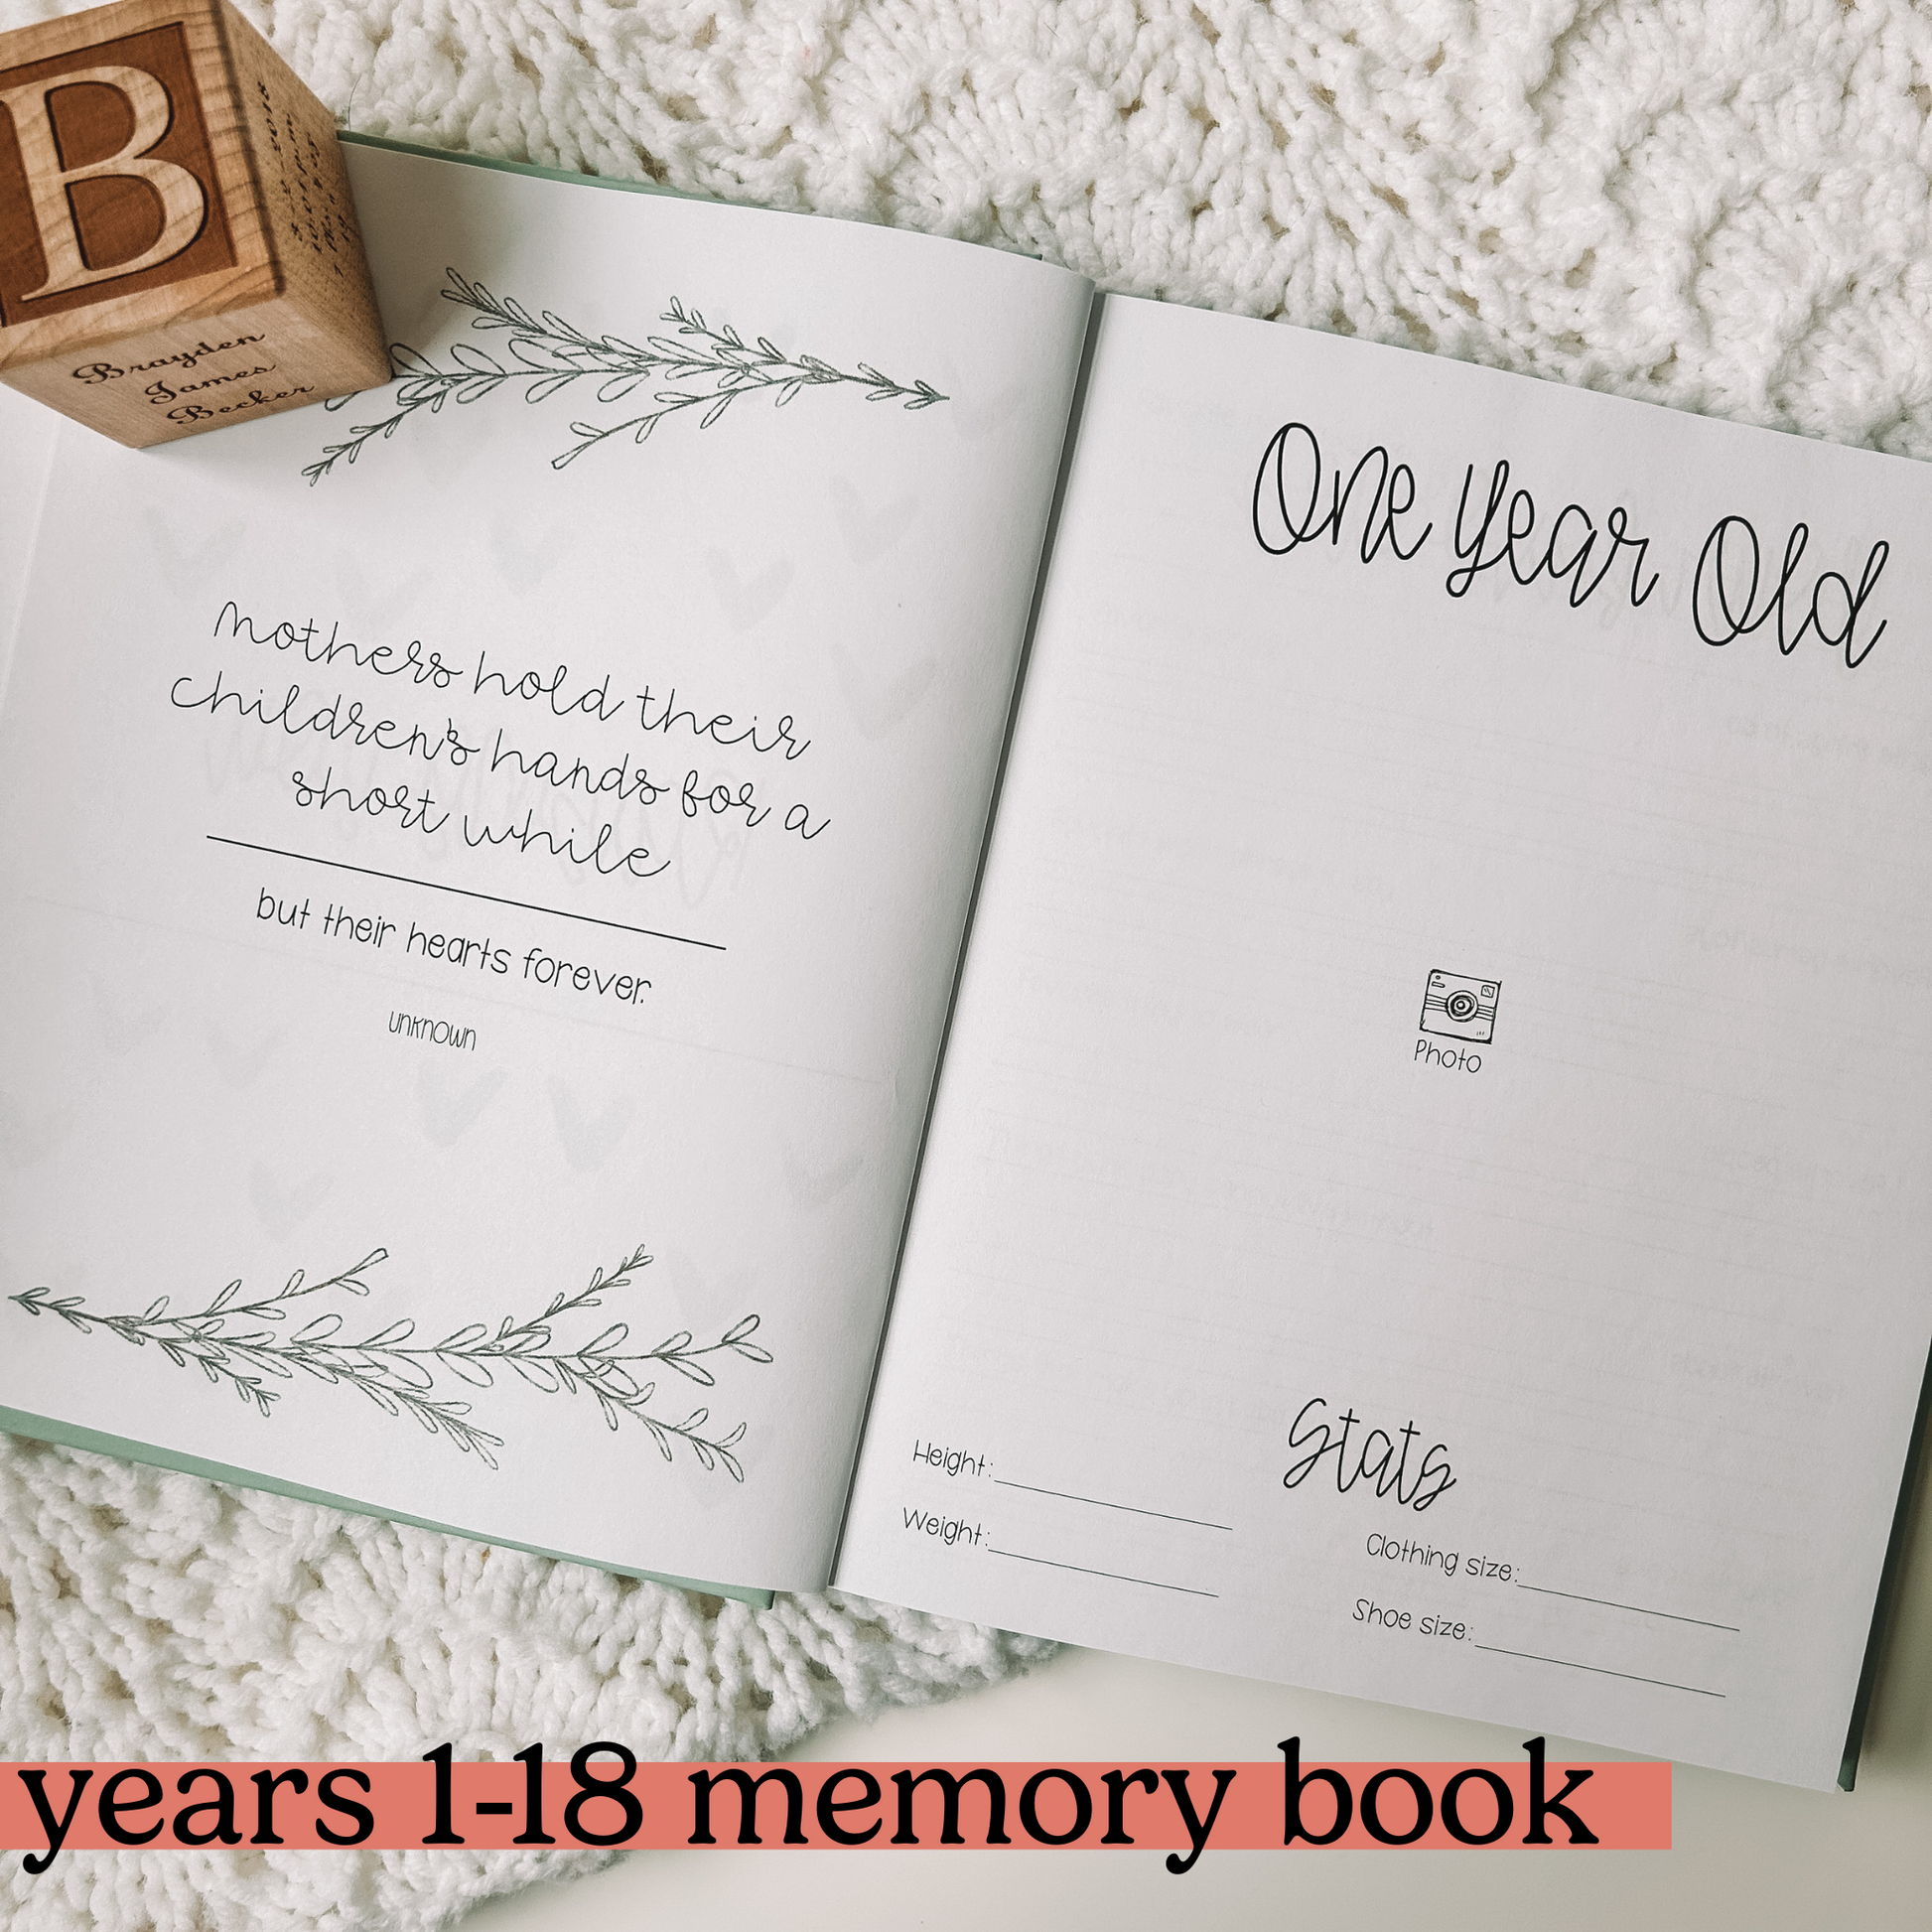 Two page spread features a quote on the left page and the page on the right is titled One Year Old with a space for a photo and stats at the bottom to fill in.